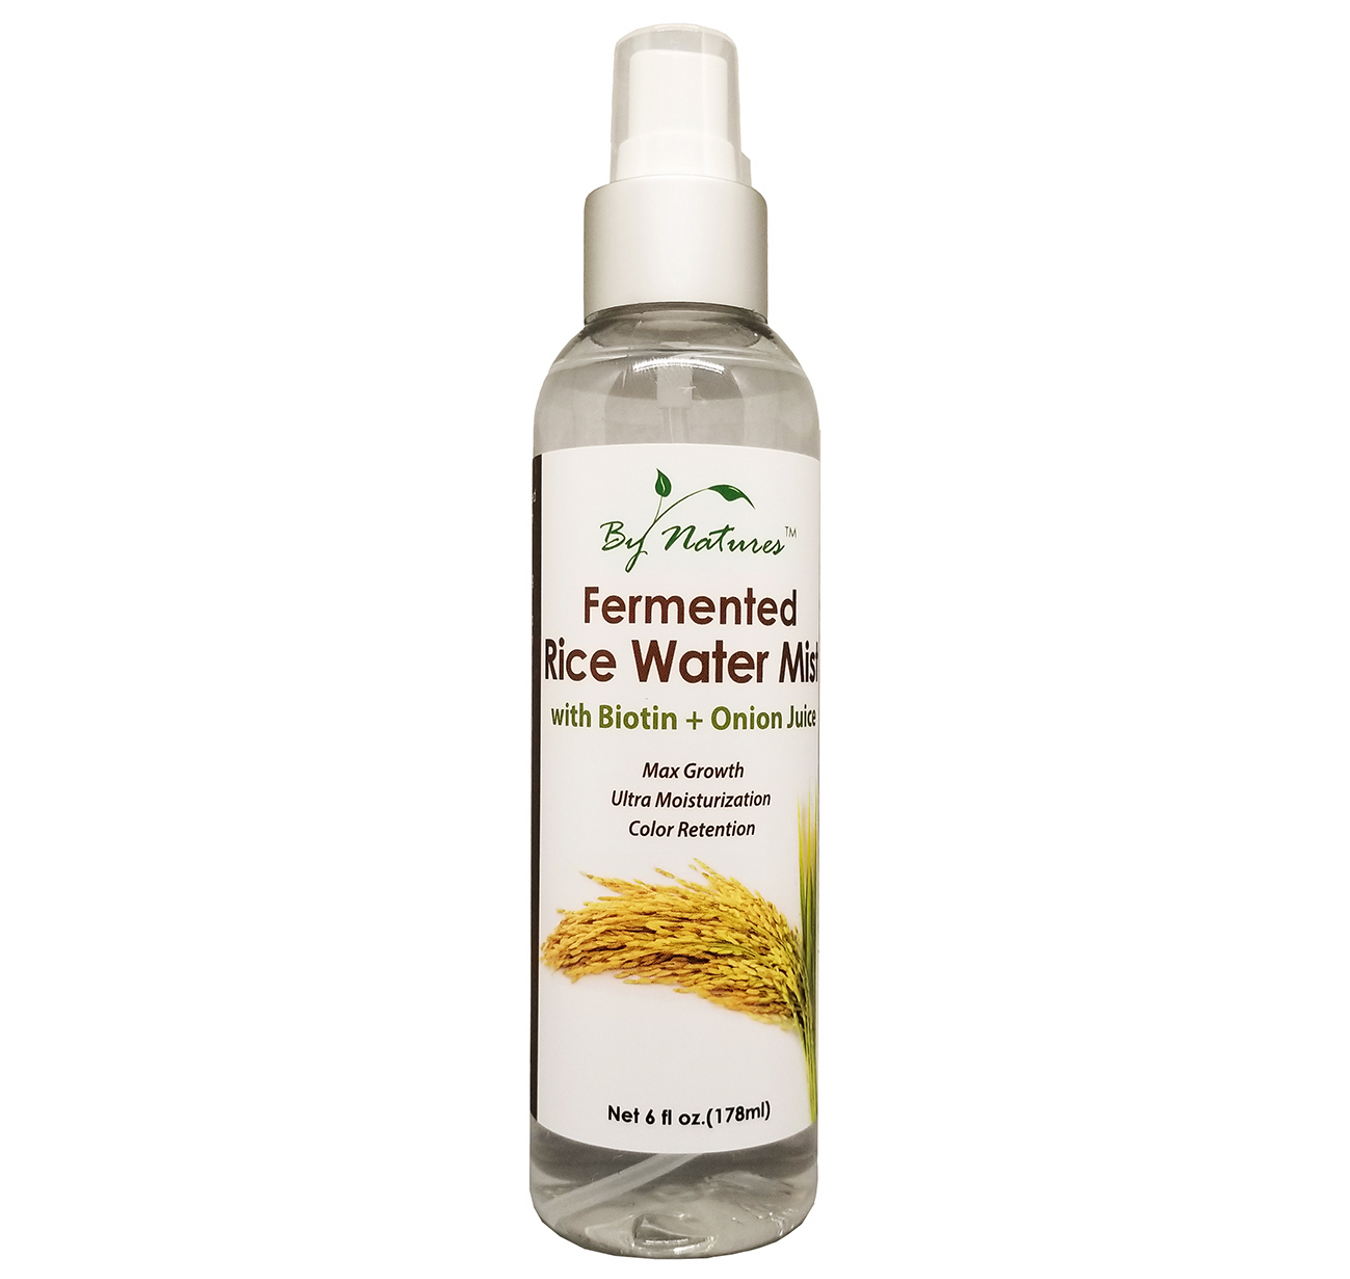 By Natures Fermented Rice Water Mist with Biotin & Onion Juice (6 oz)